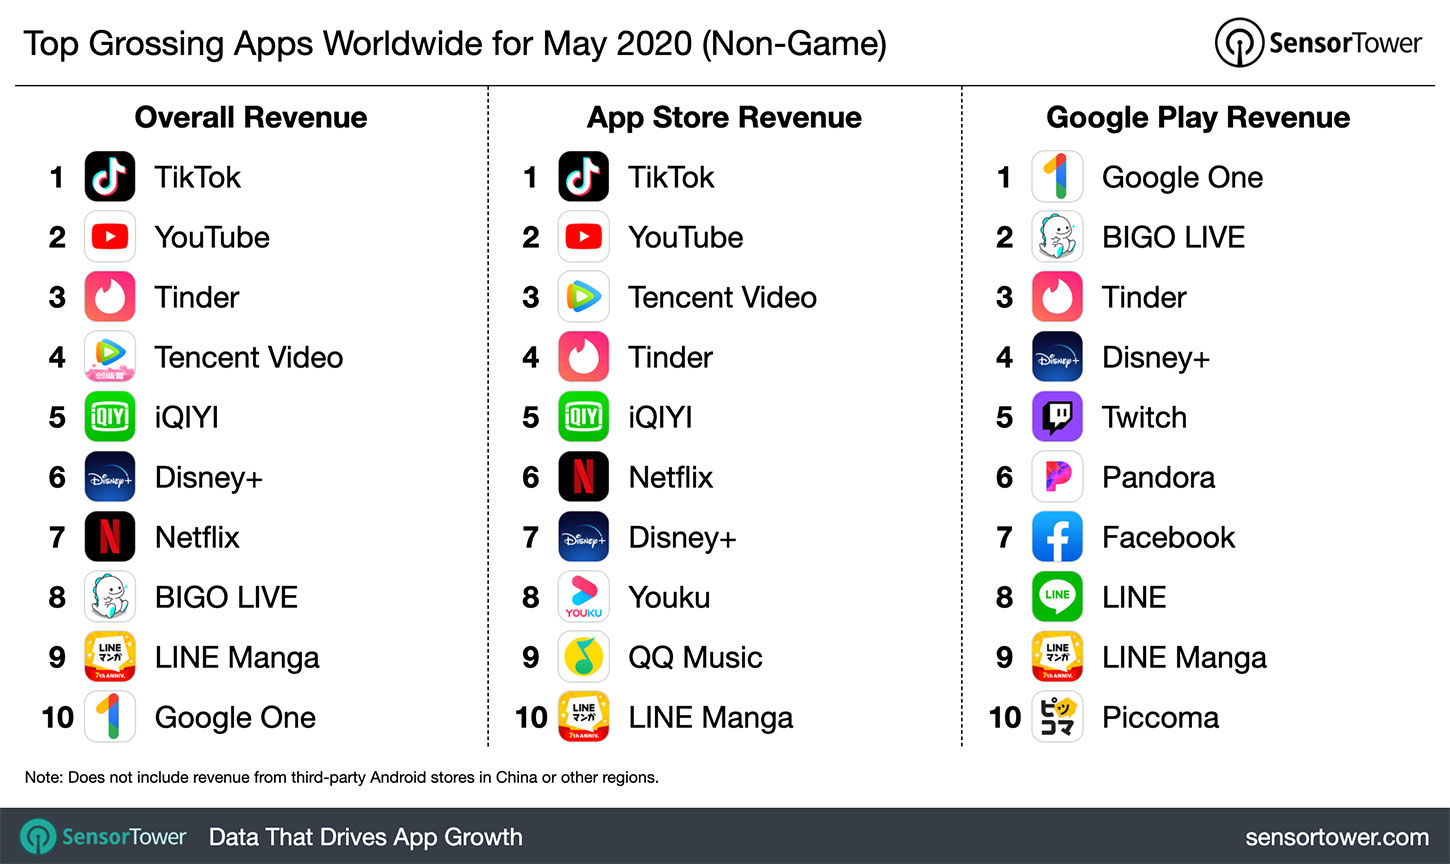 Top Grossing Apps Worldwide for May 2020